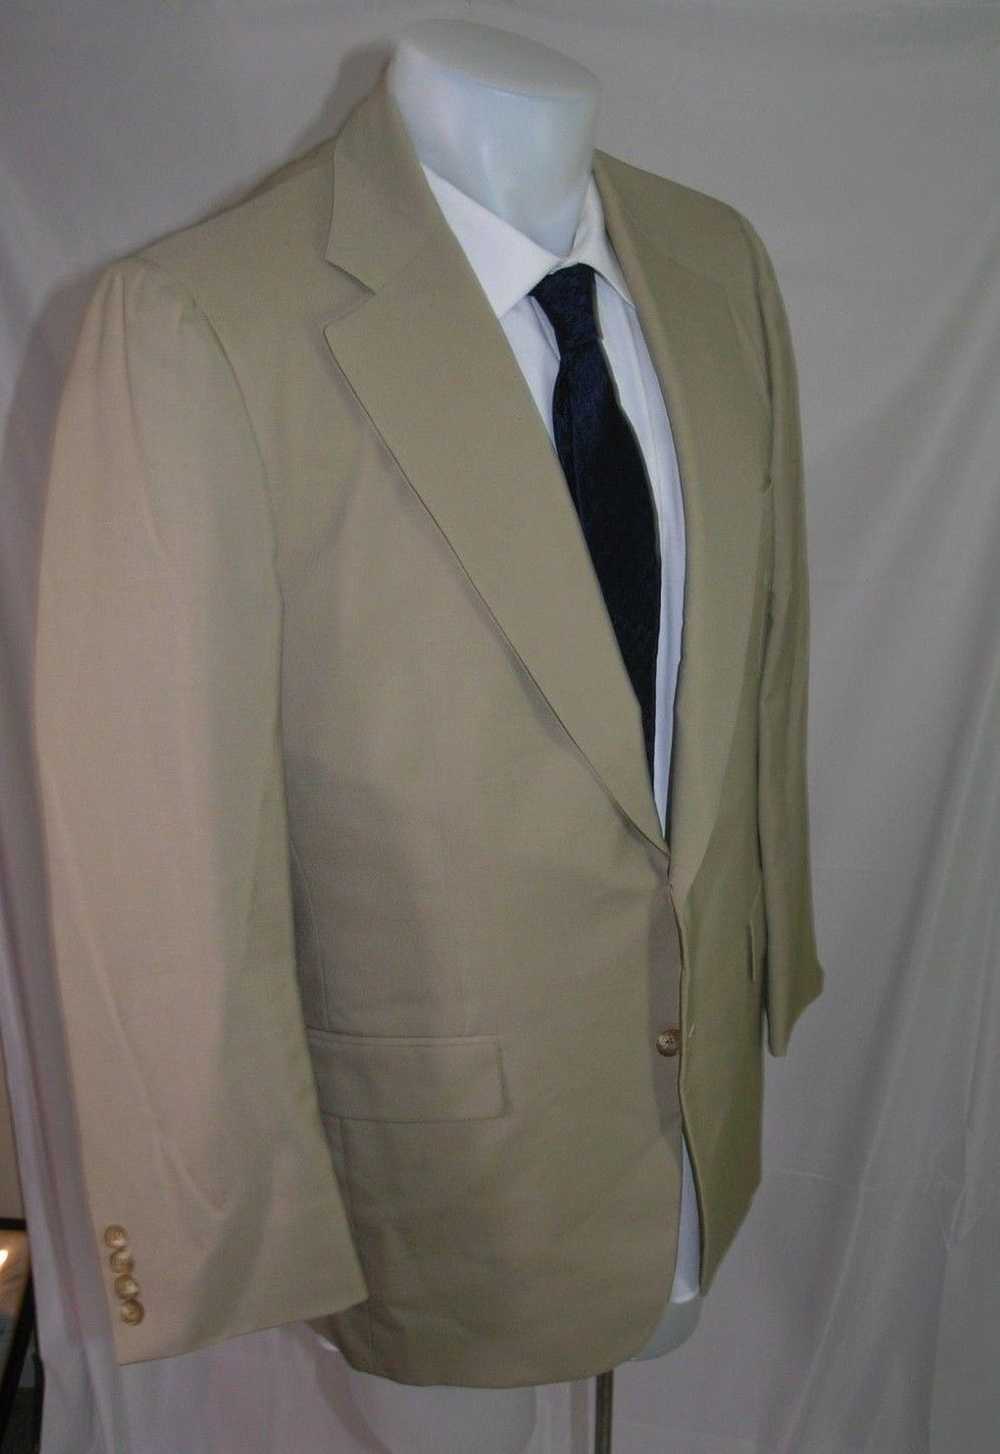 Alfred Dunhill Bespoke Two Button Blazer 40R - image 5